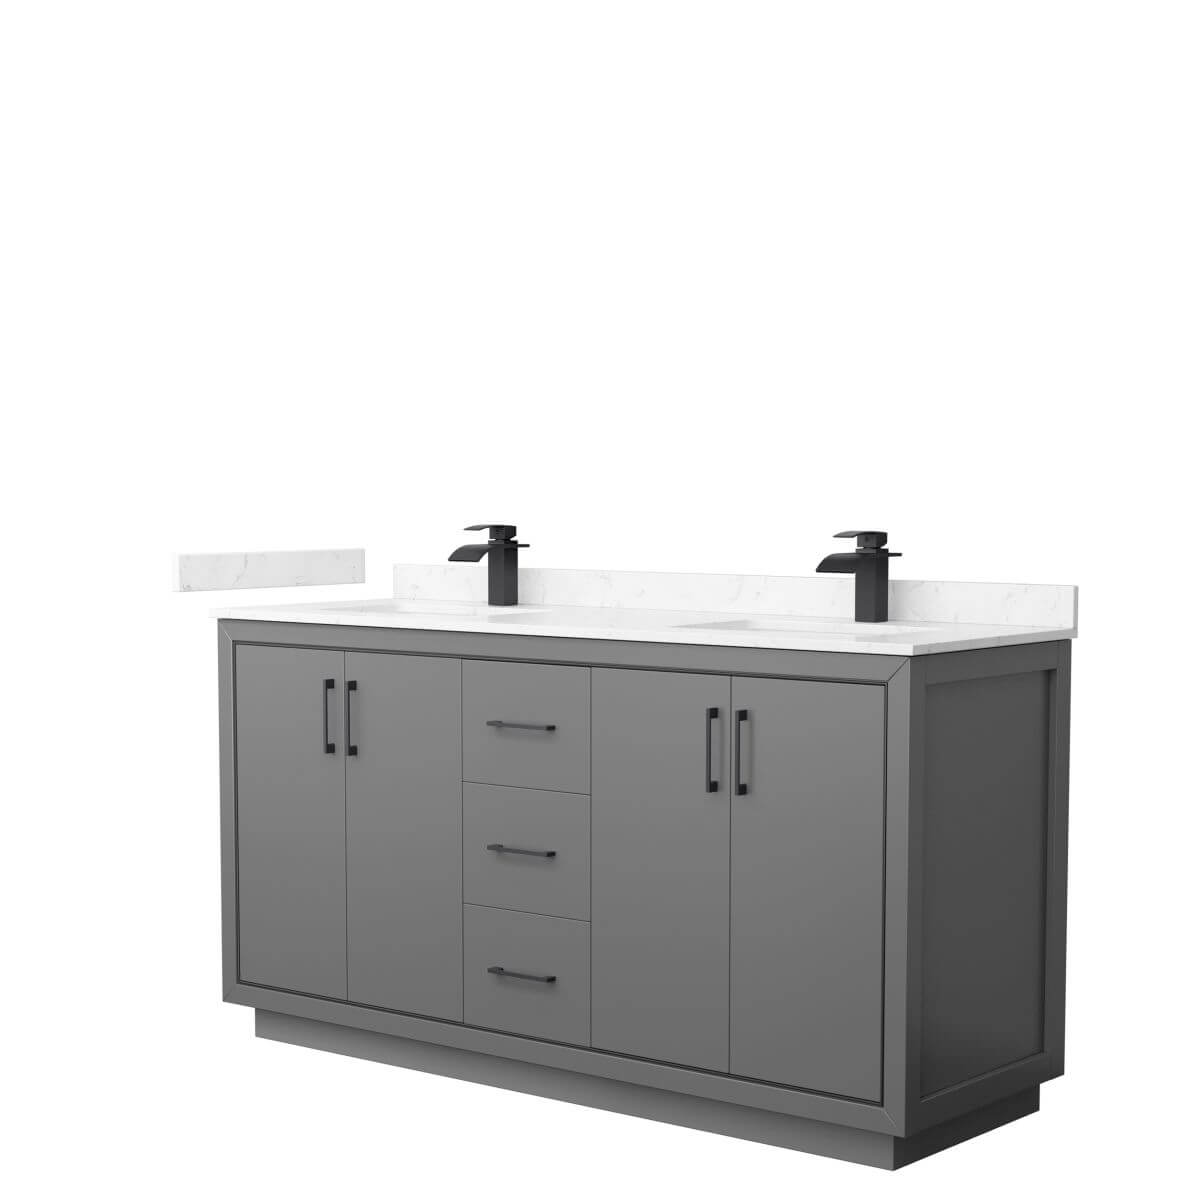 Wyndham Collection WCF111166DGBC2UNSMXX Icon 66 inch Double Bathroom Vanity in Dark Gray with Carrara Cultured Marble Countertop, Undermount Square Sinks and Matte Black Trim